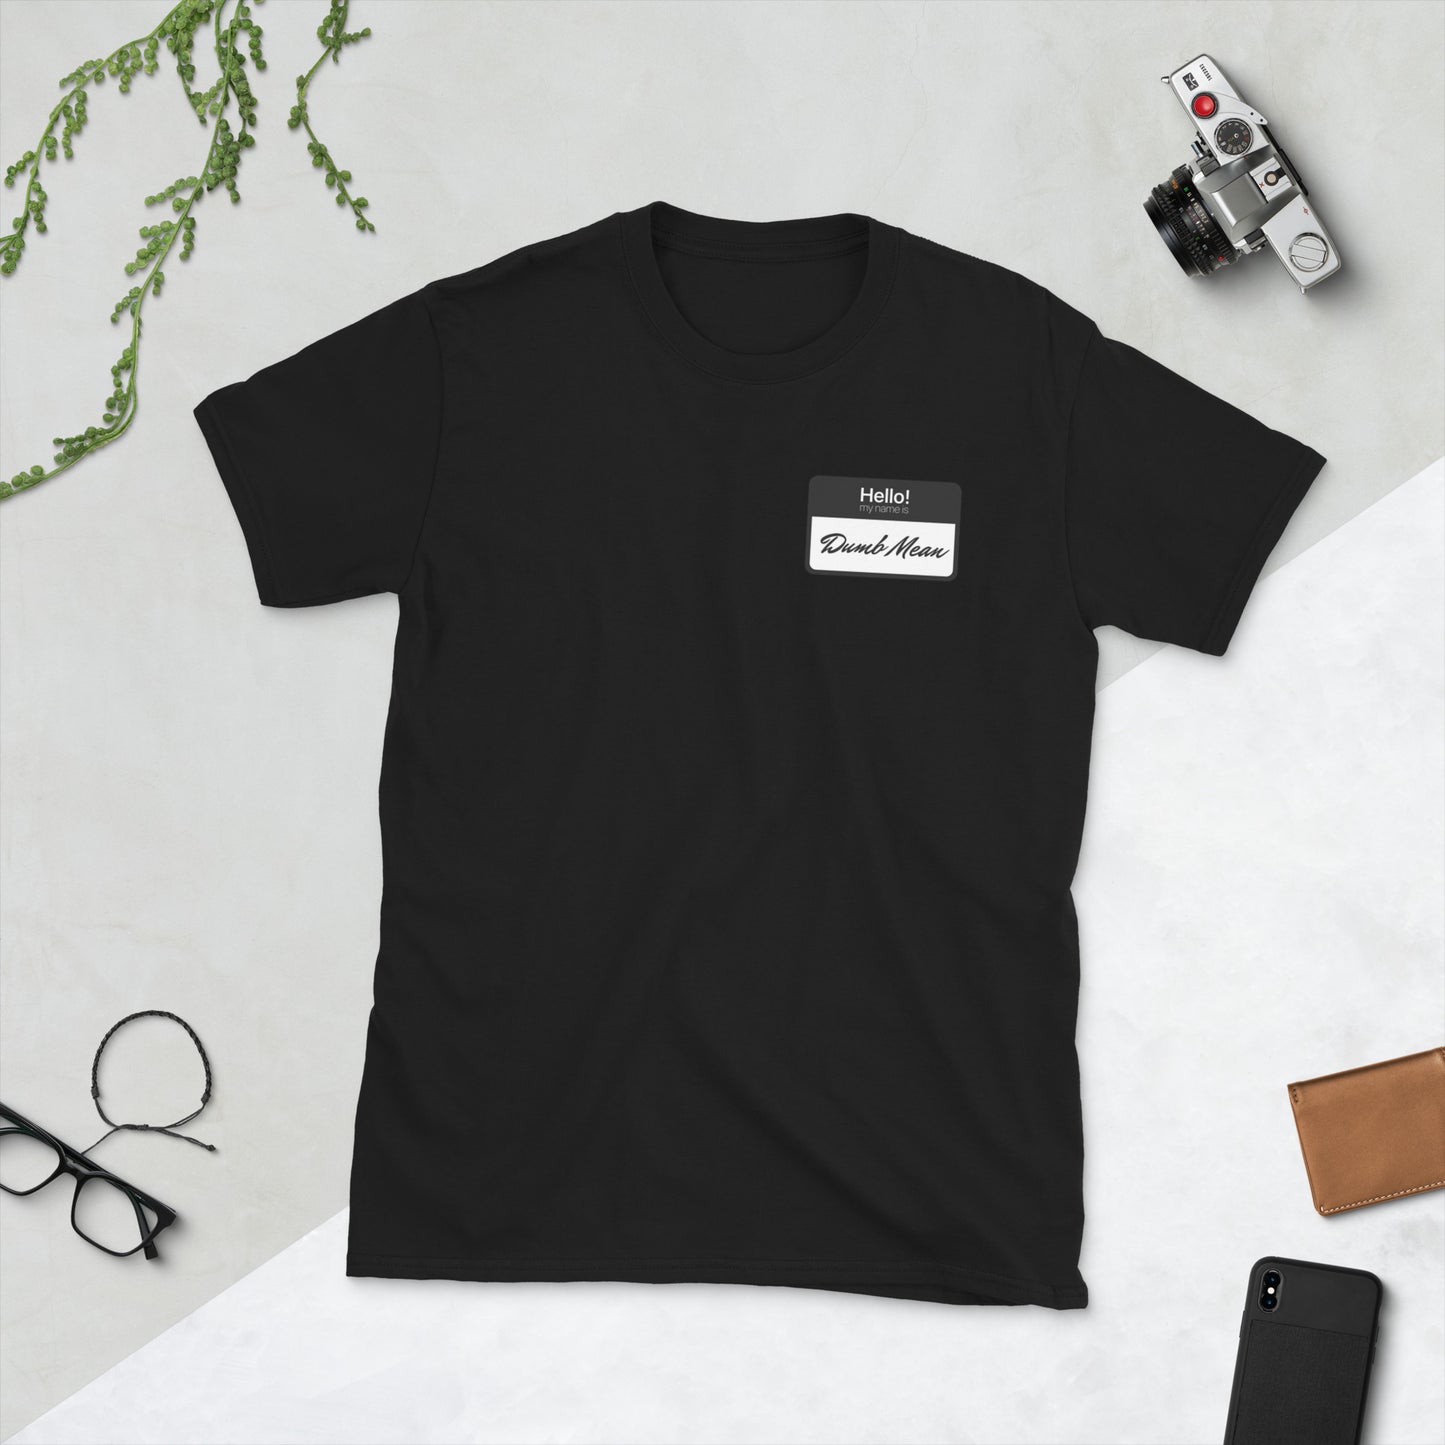 Hello My Name is: Dumb Mean Short-Sleeve Unisex T-Shirt.